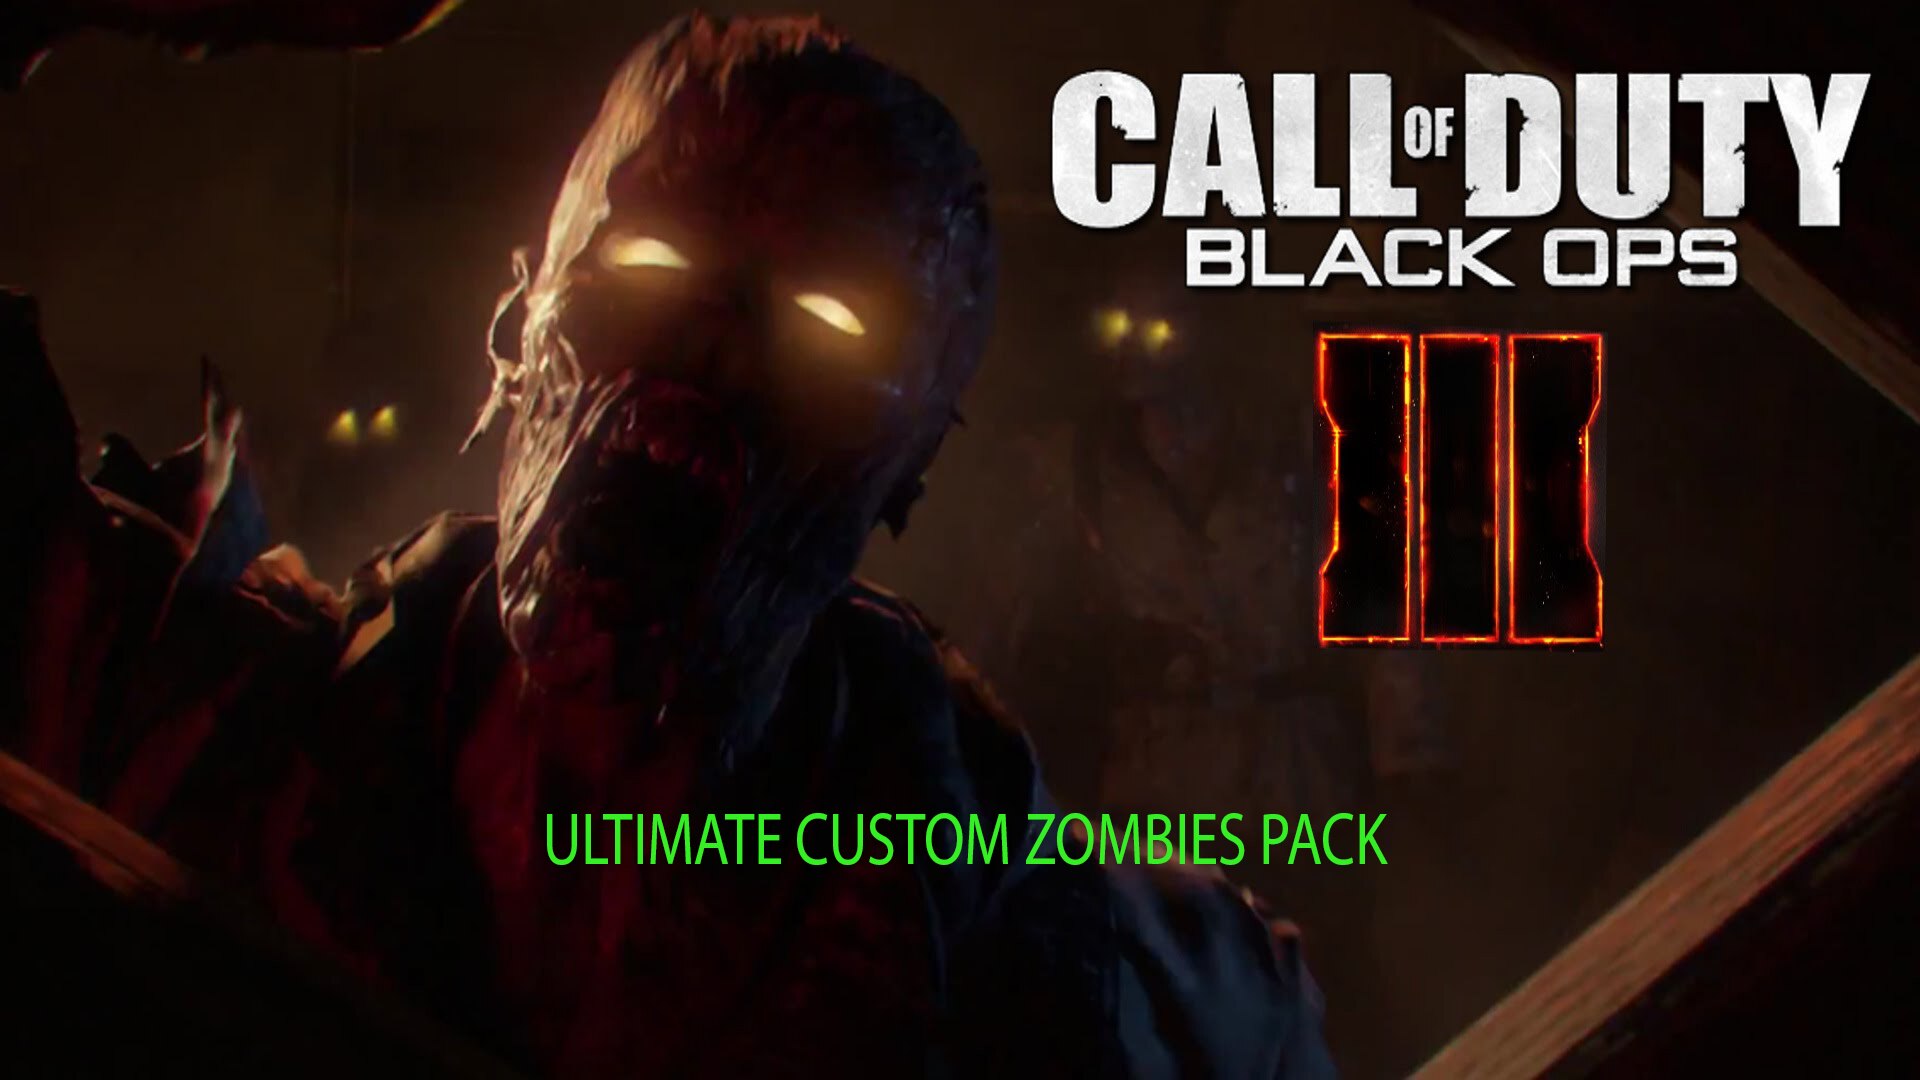 Blunder gat  Call of duty zombies, Black ops zombies, Call of duty black  ops 3